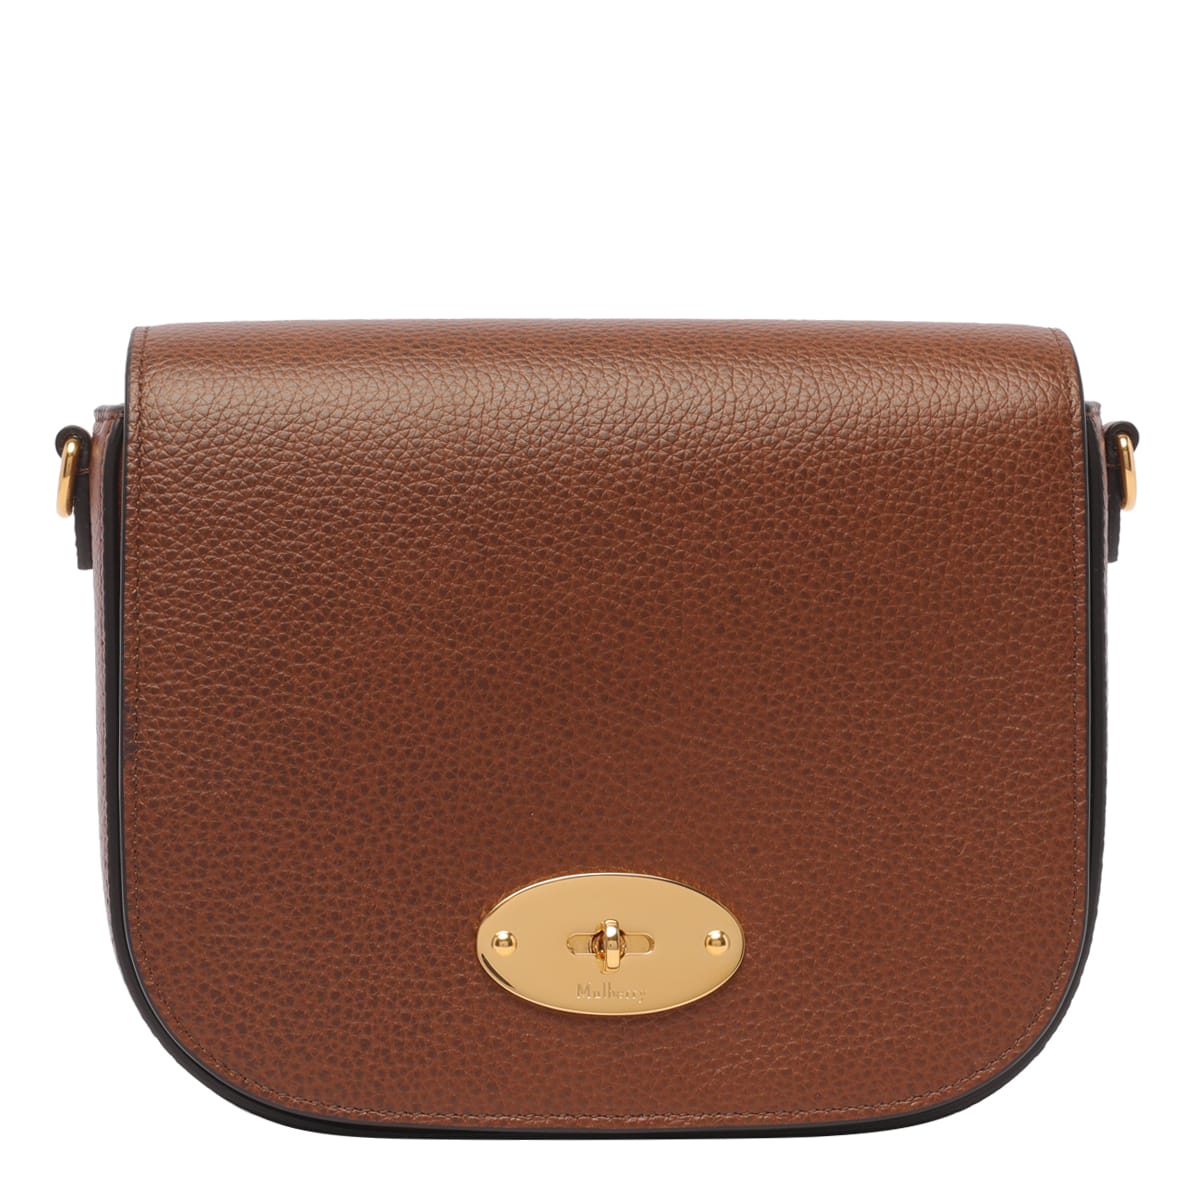 MULBERRY SMALL DARLEY SATCHEL BAG